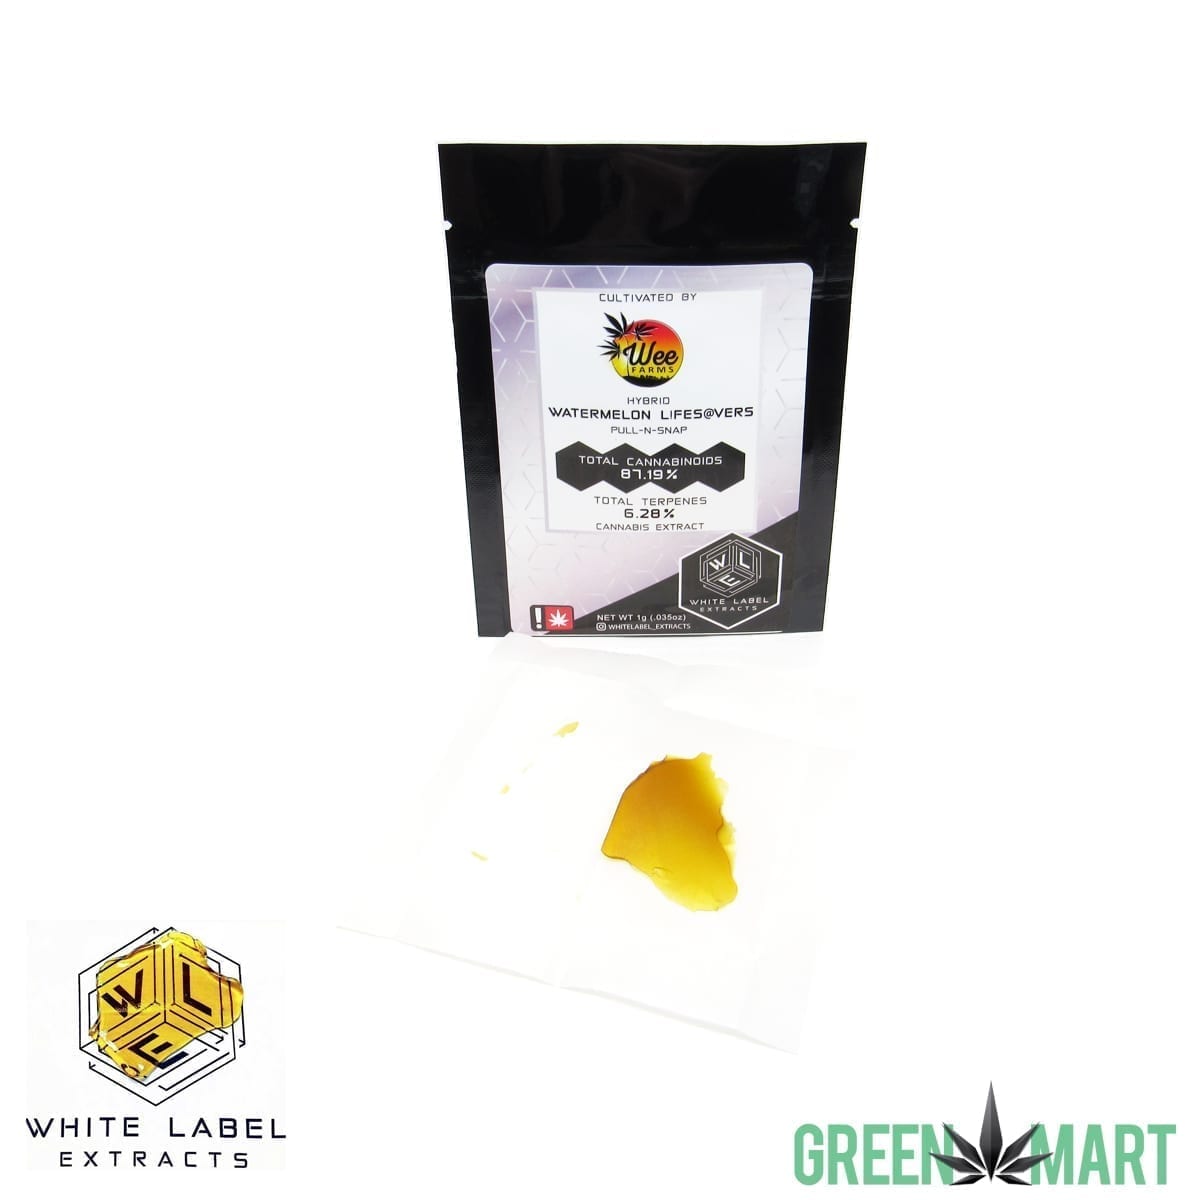 White Label Extracts - Watermelon Life S@vers